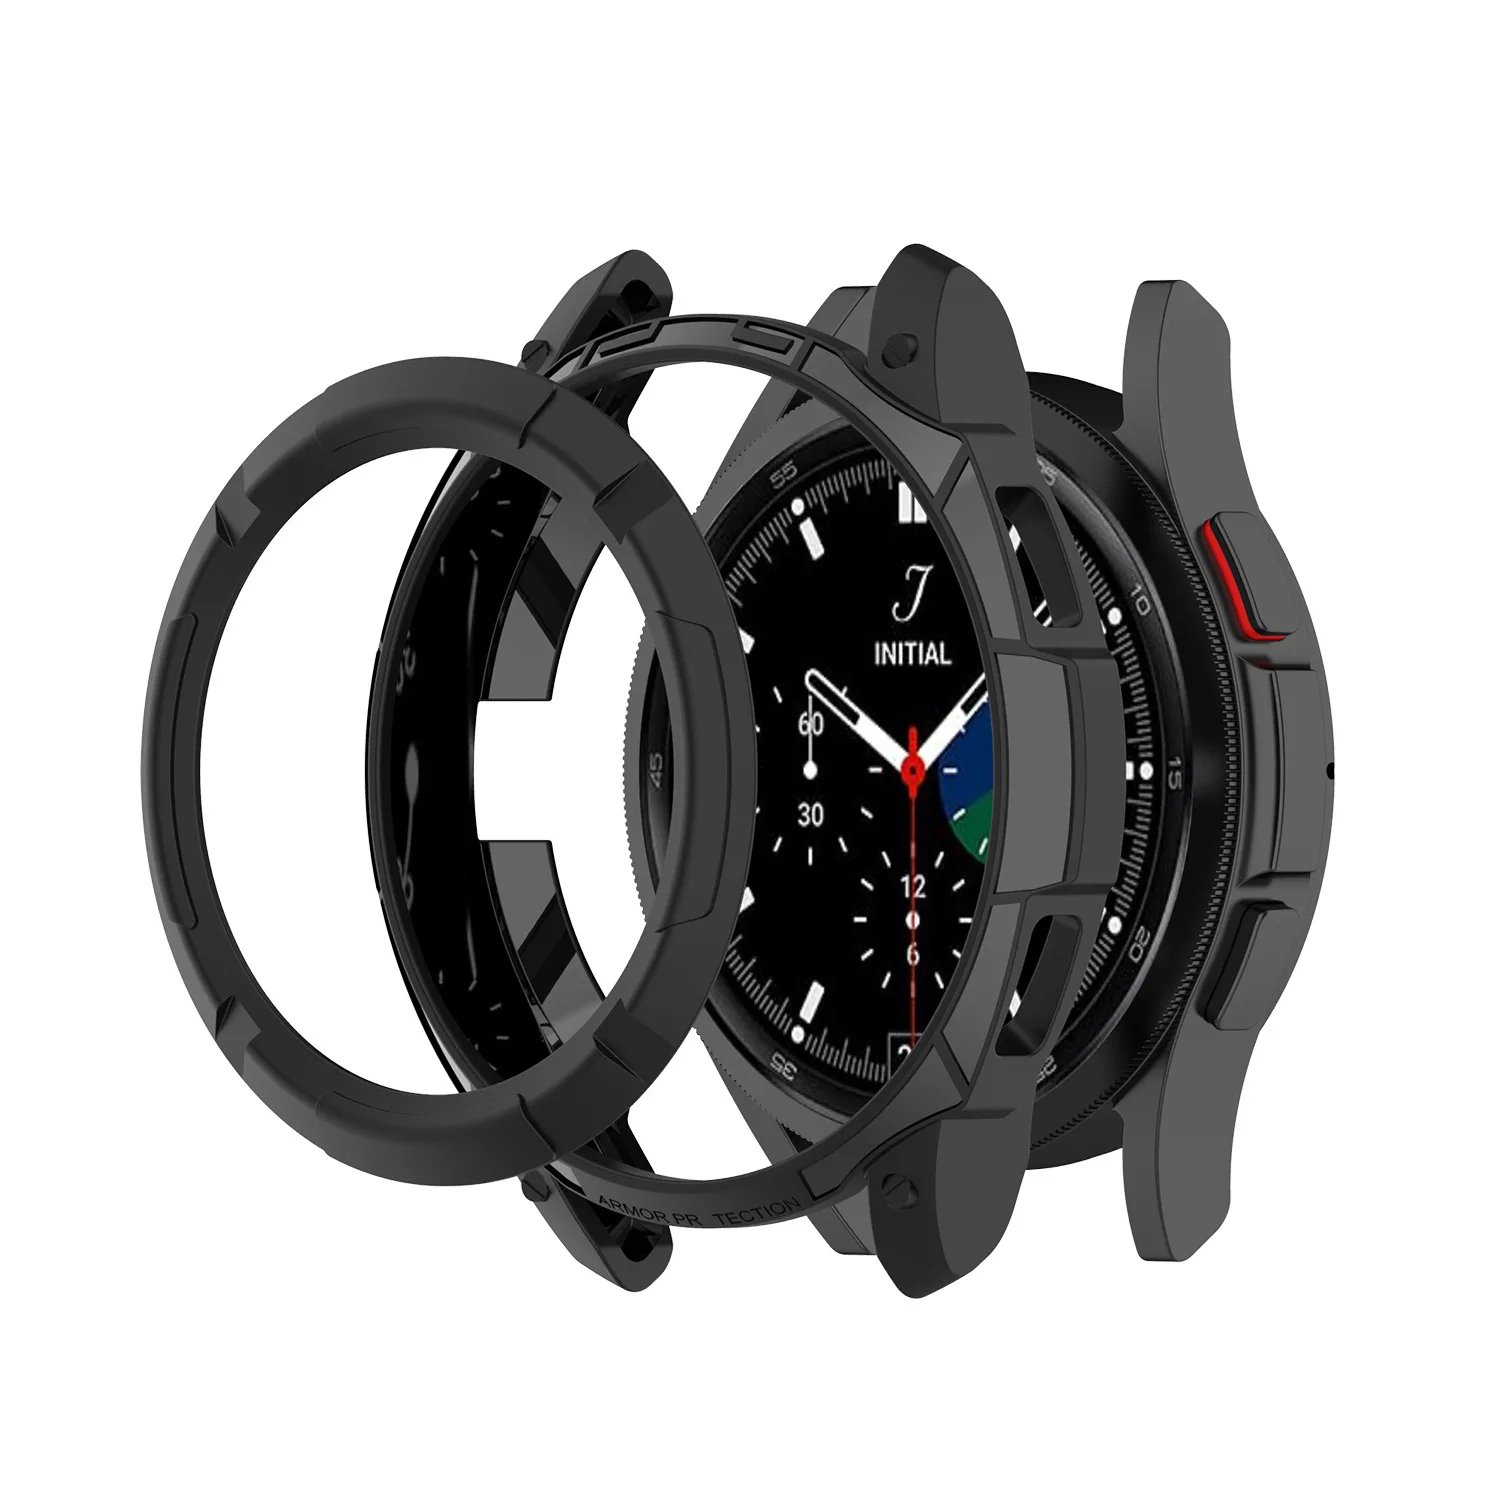 

Armor Protective Cover For Samsung Galaxy Watch4 Classic Screen Case Tpu For Samsung Galaxy Watch 4 Classic 42mm 46mm, Many colors are available